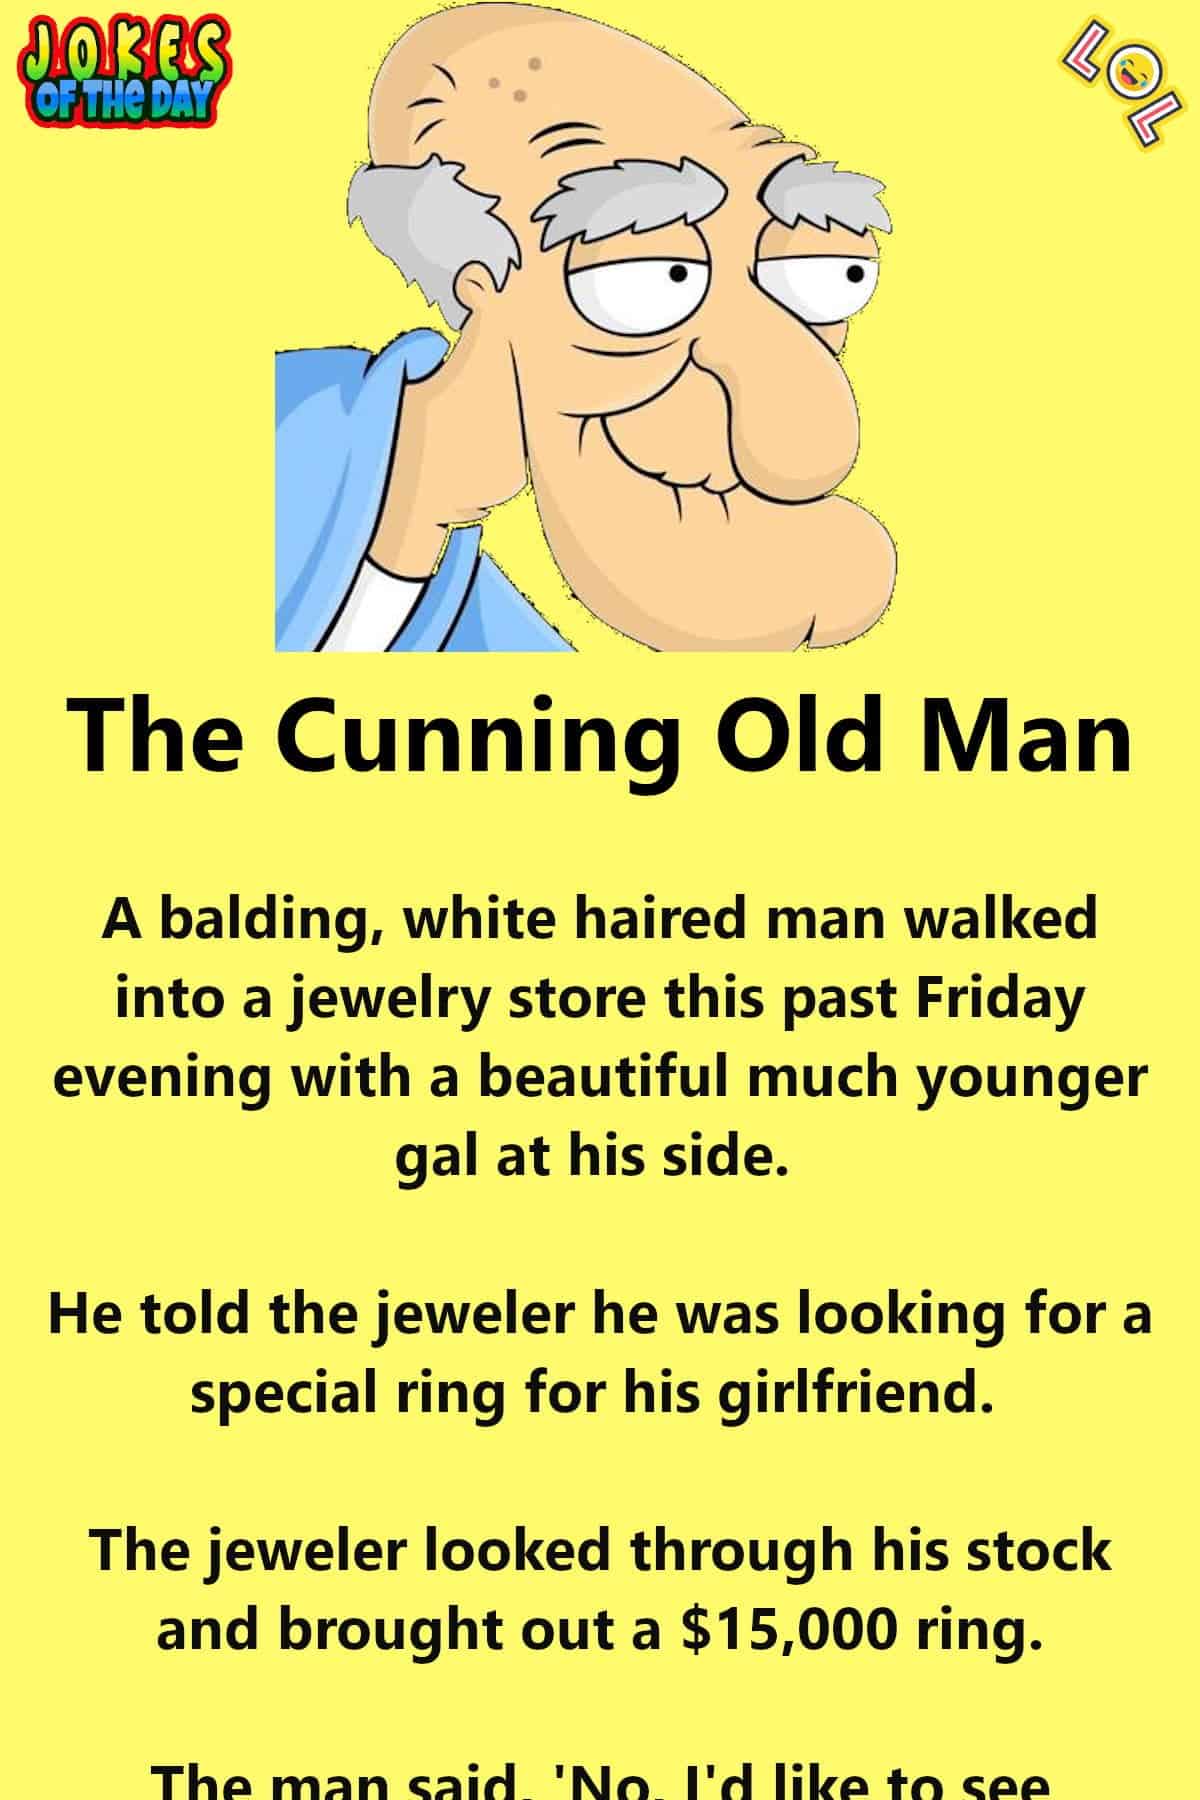 Adult Humor - The Cunning Old Man